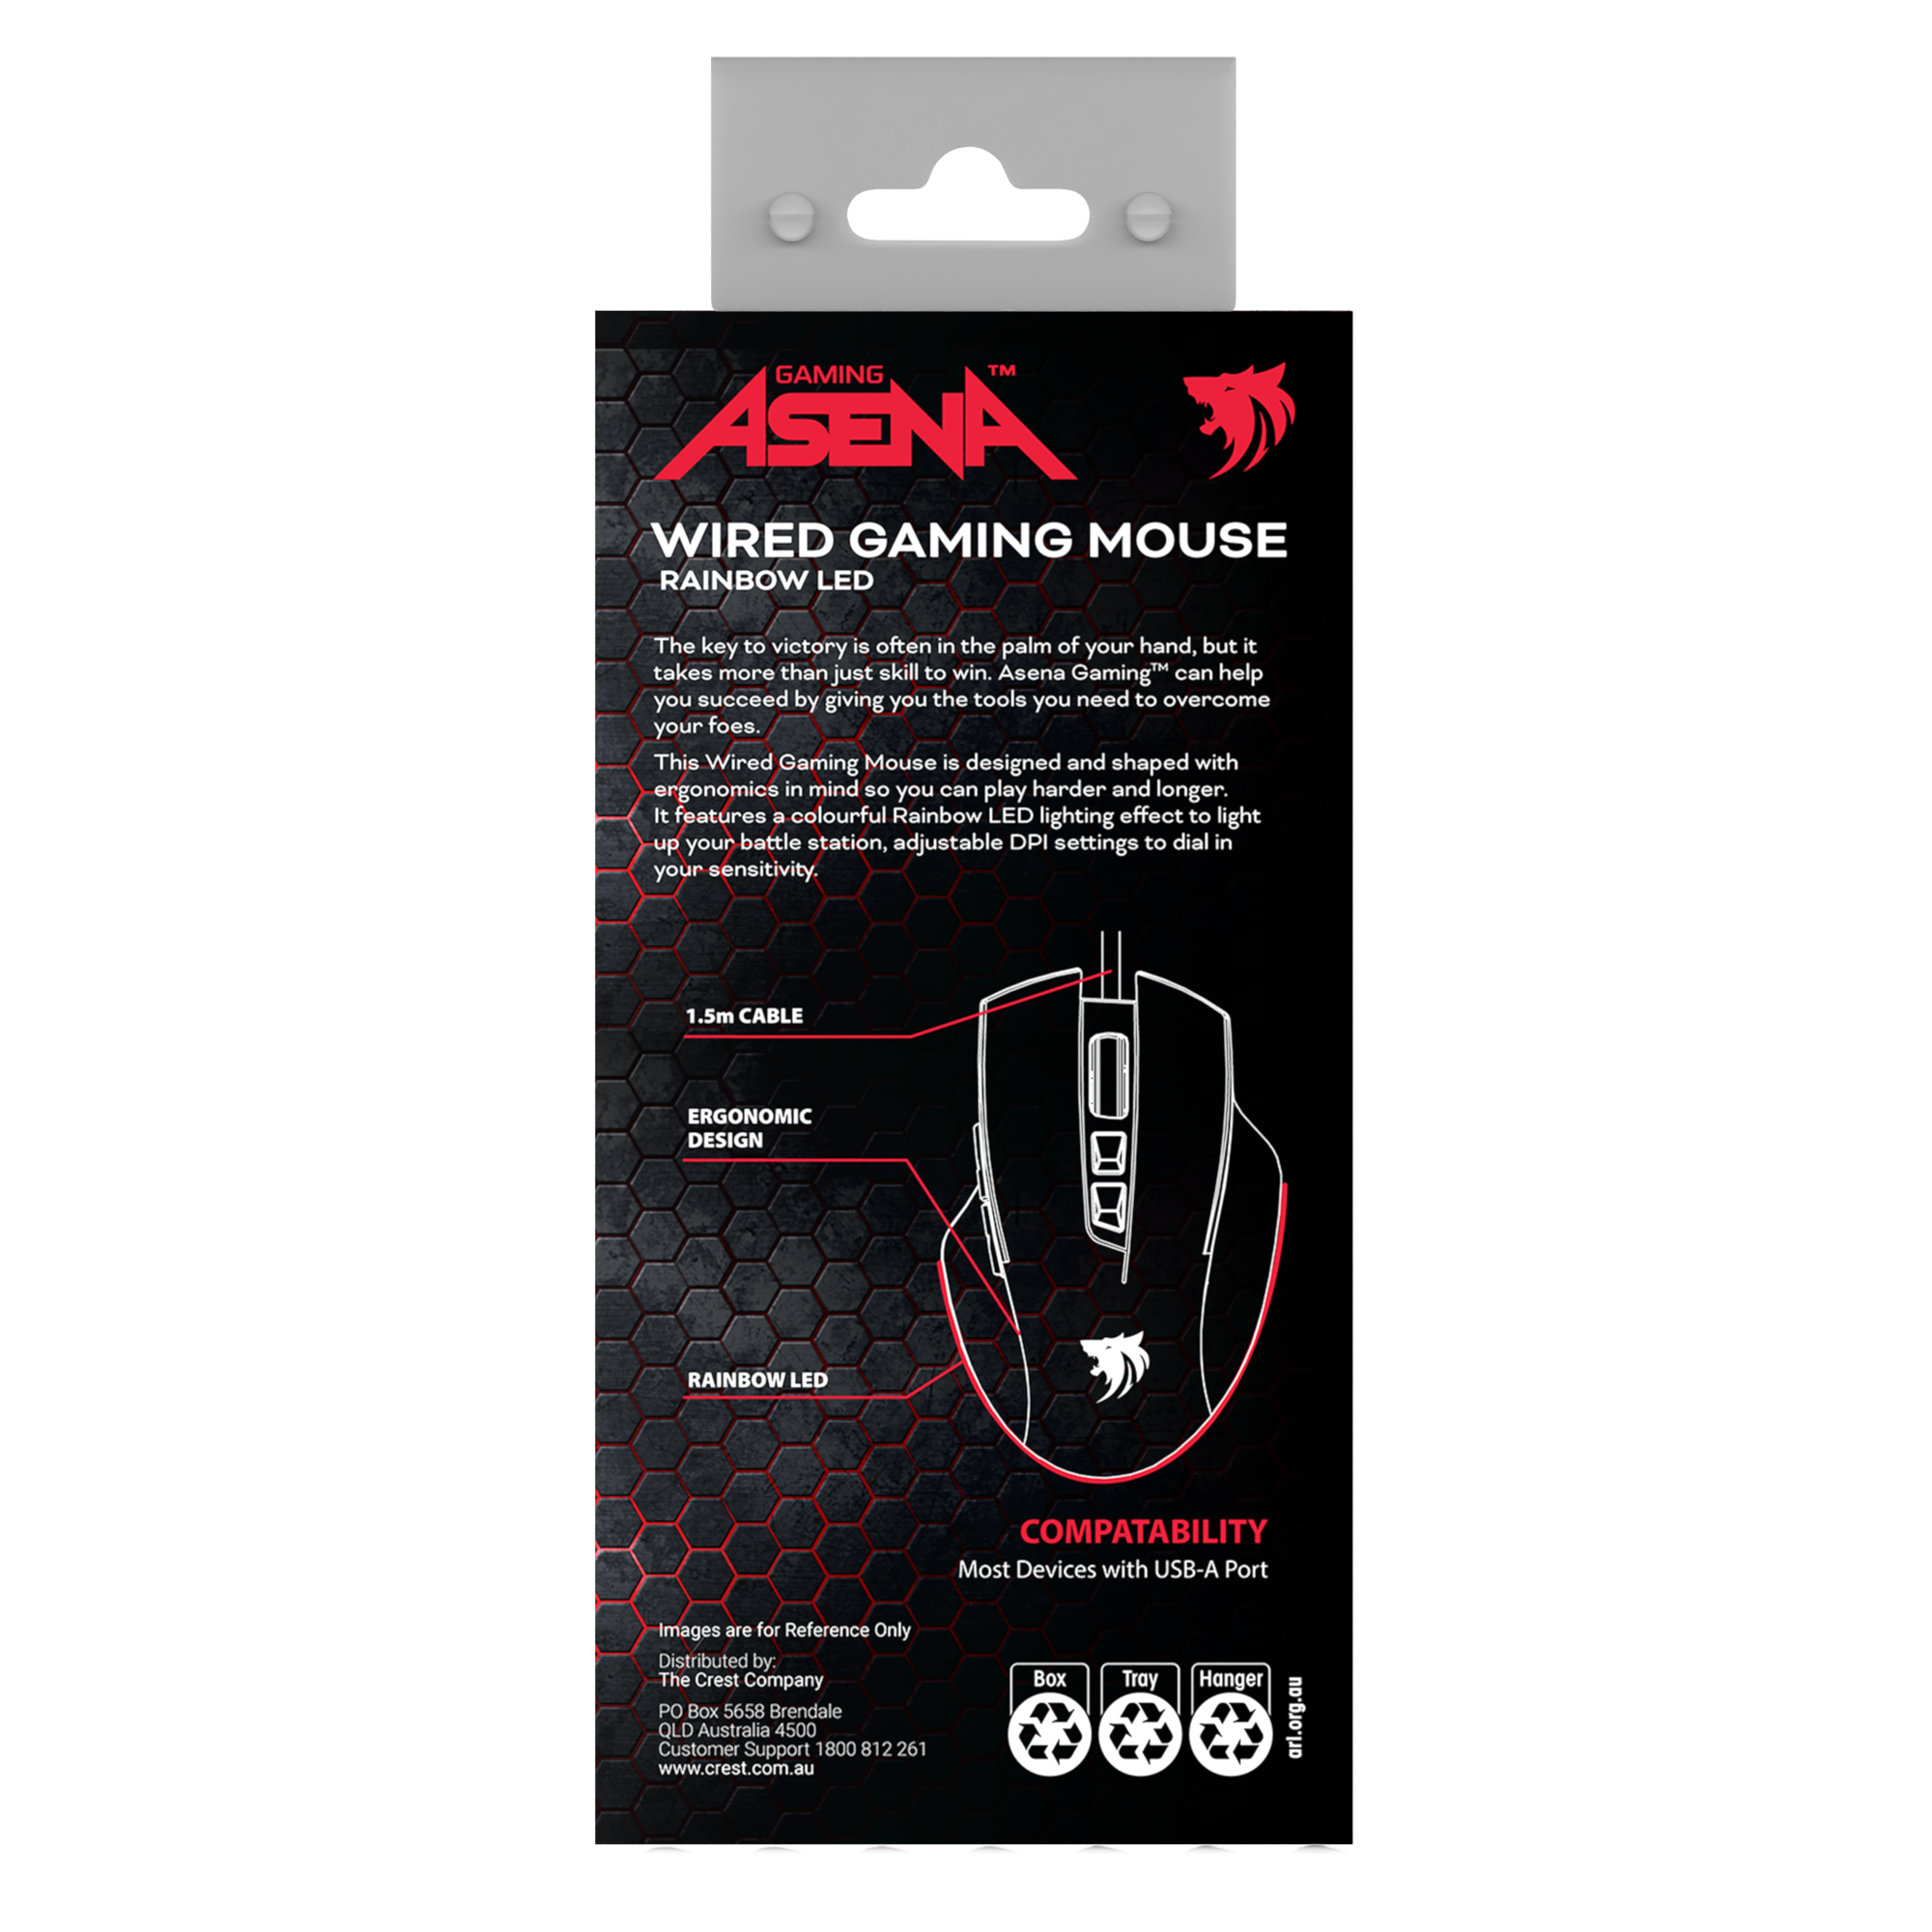 Asena Gaming Wired Gaming Mouse